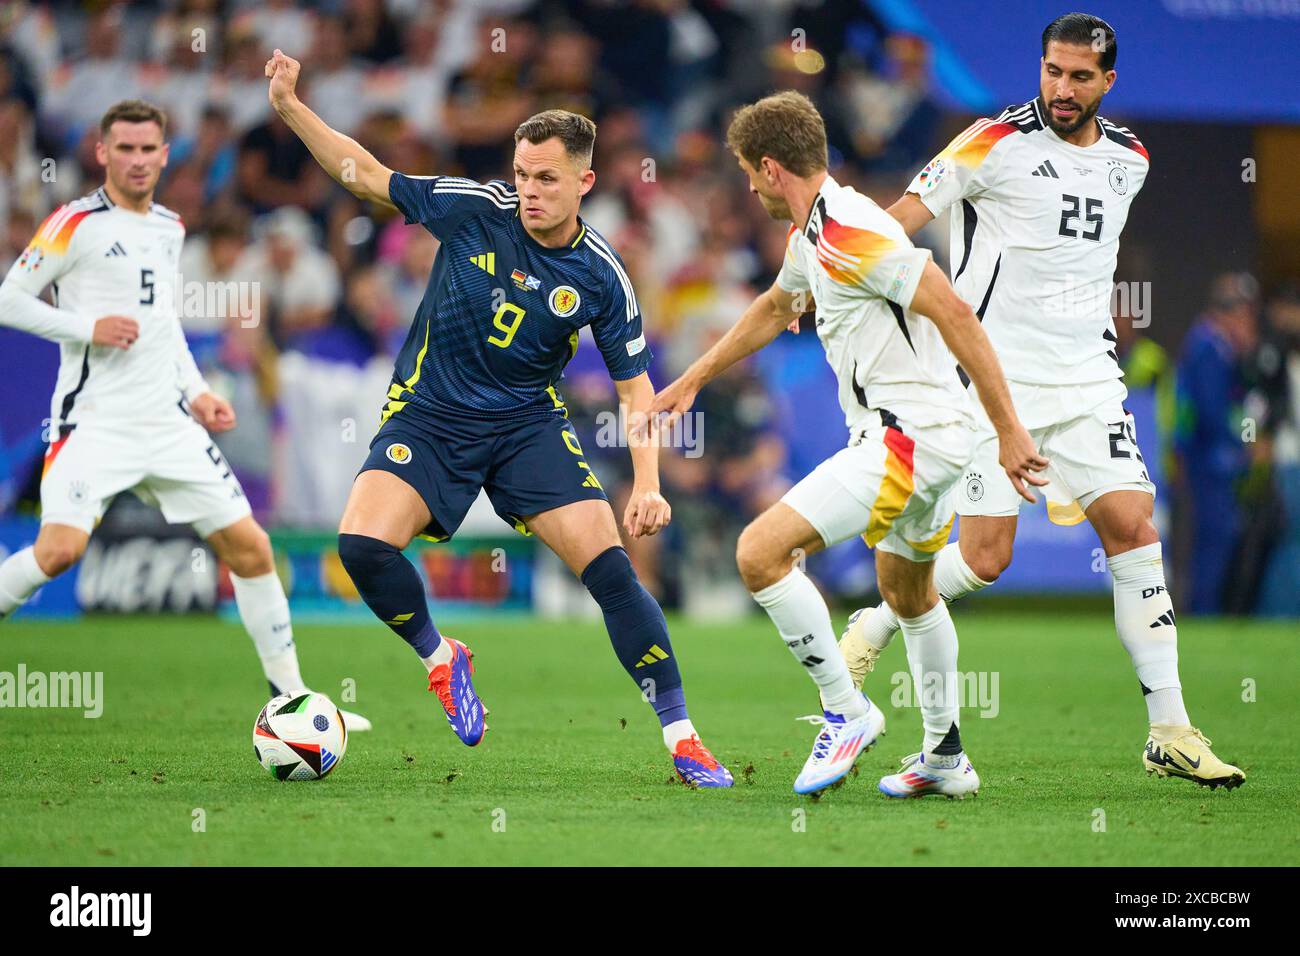 Thomas Müller, Mueller, DFB 13 Emre Can, DFB 25  compete for the ball, tackling, duel, header, zweikampf, action, fight against Lawrence Shankland, SCO 9  in the group stage match GERMANY  - SCOTLAND 5-1 of the UEFA European Championships 2024  on Jun 14, 2024  in Munich, Germany.  Photographer: Peter Schatz Stock Photo